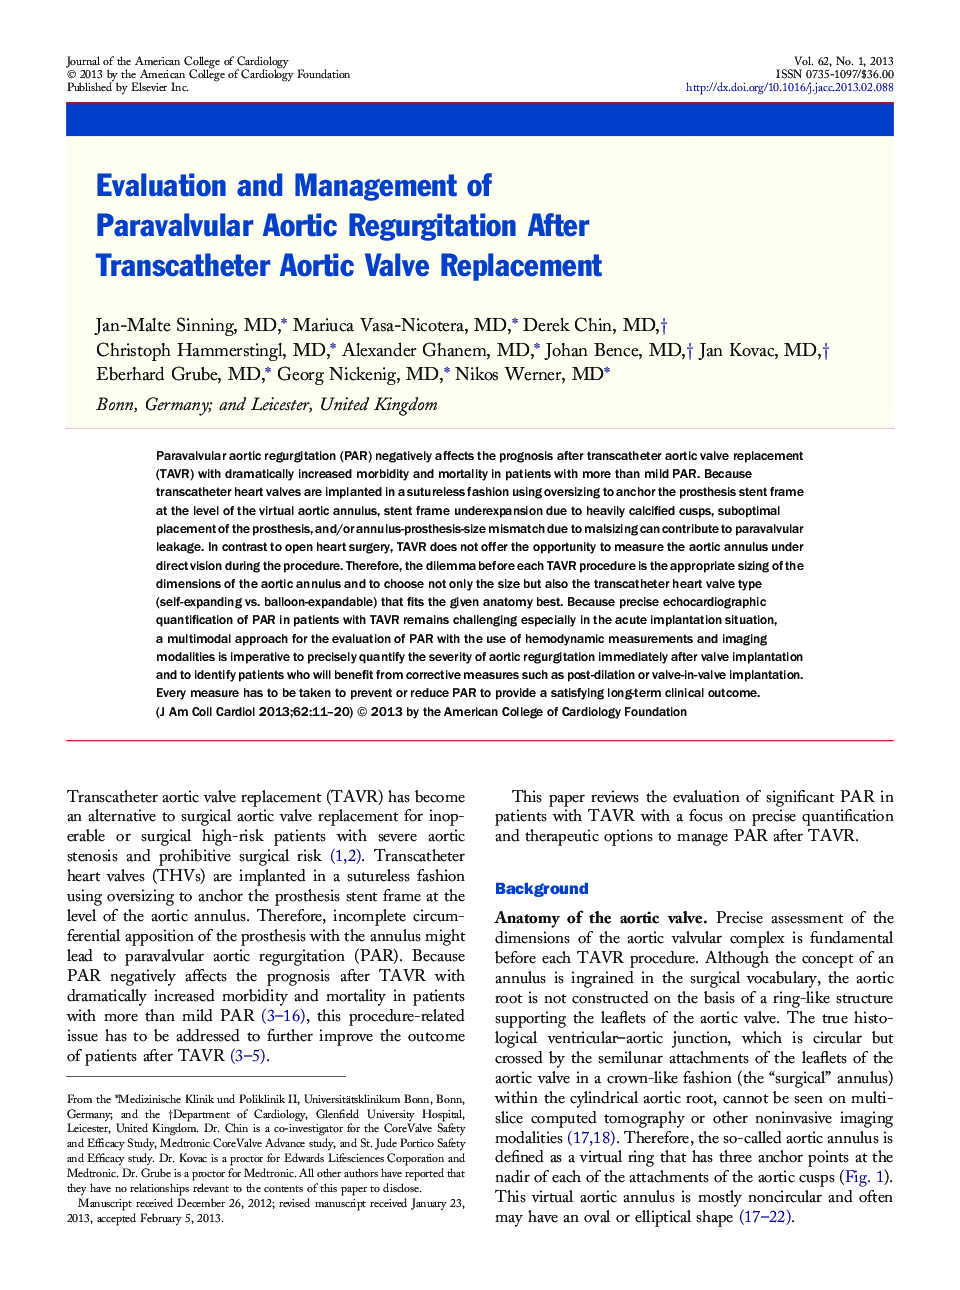 Evaluation and Management of Paravalvular Aortic Regurgitation After Transcatheter Aortic Valve Replacement 